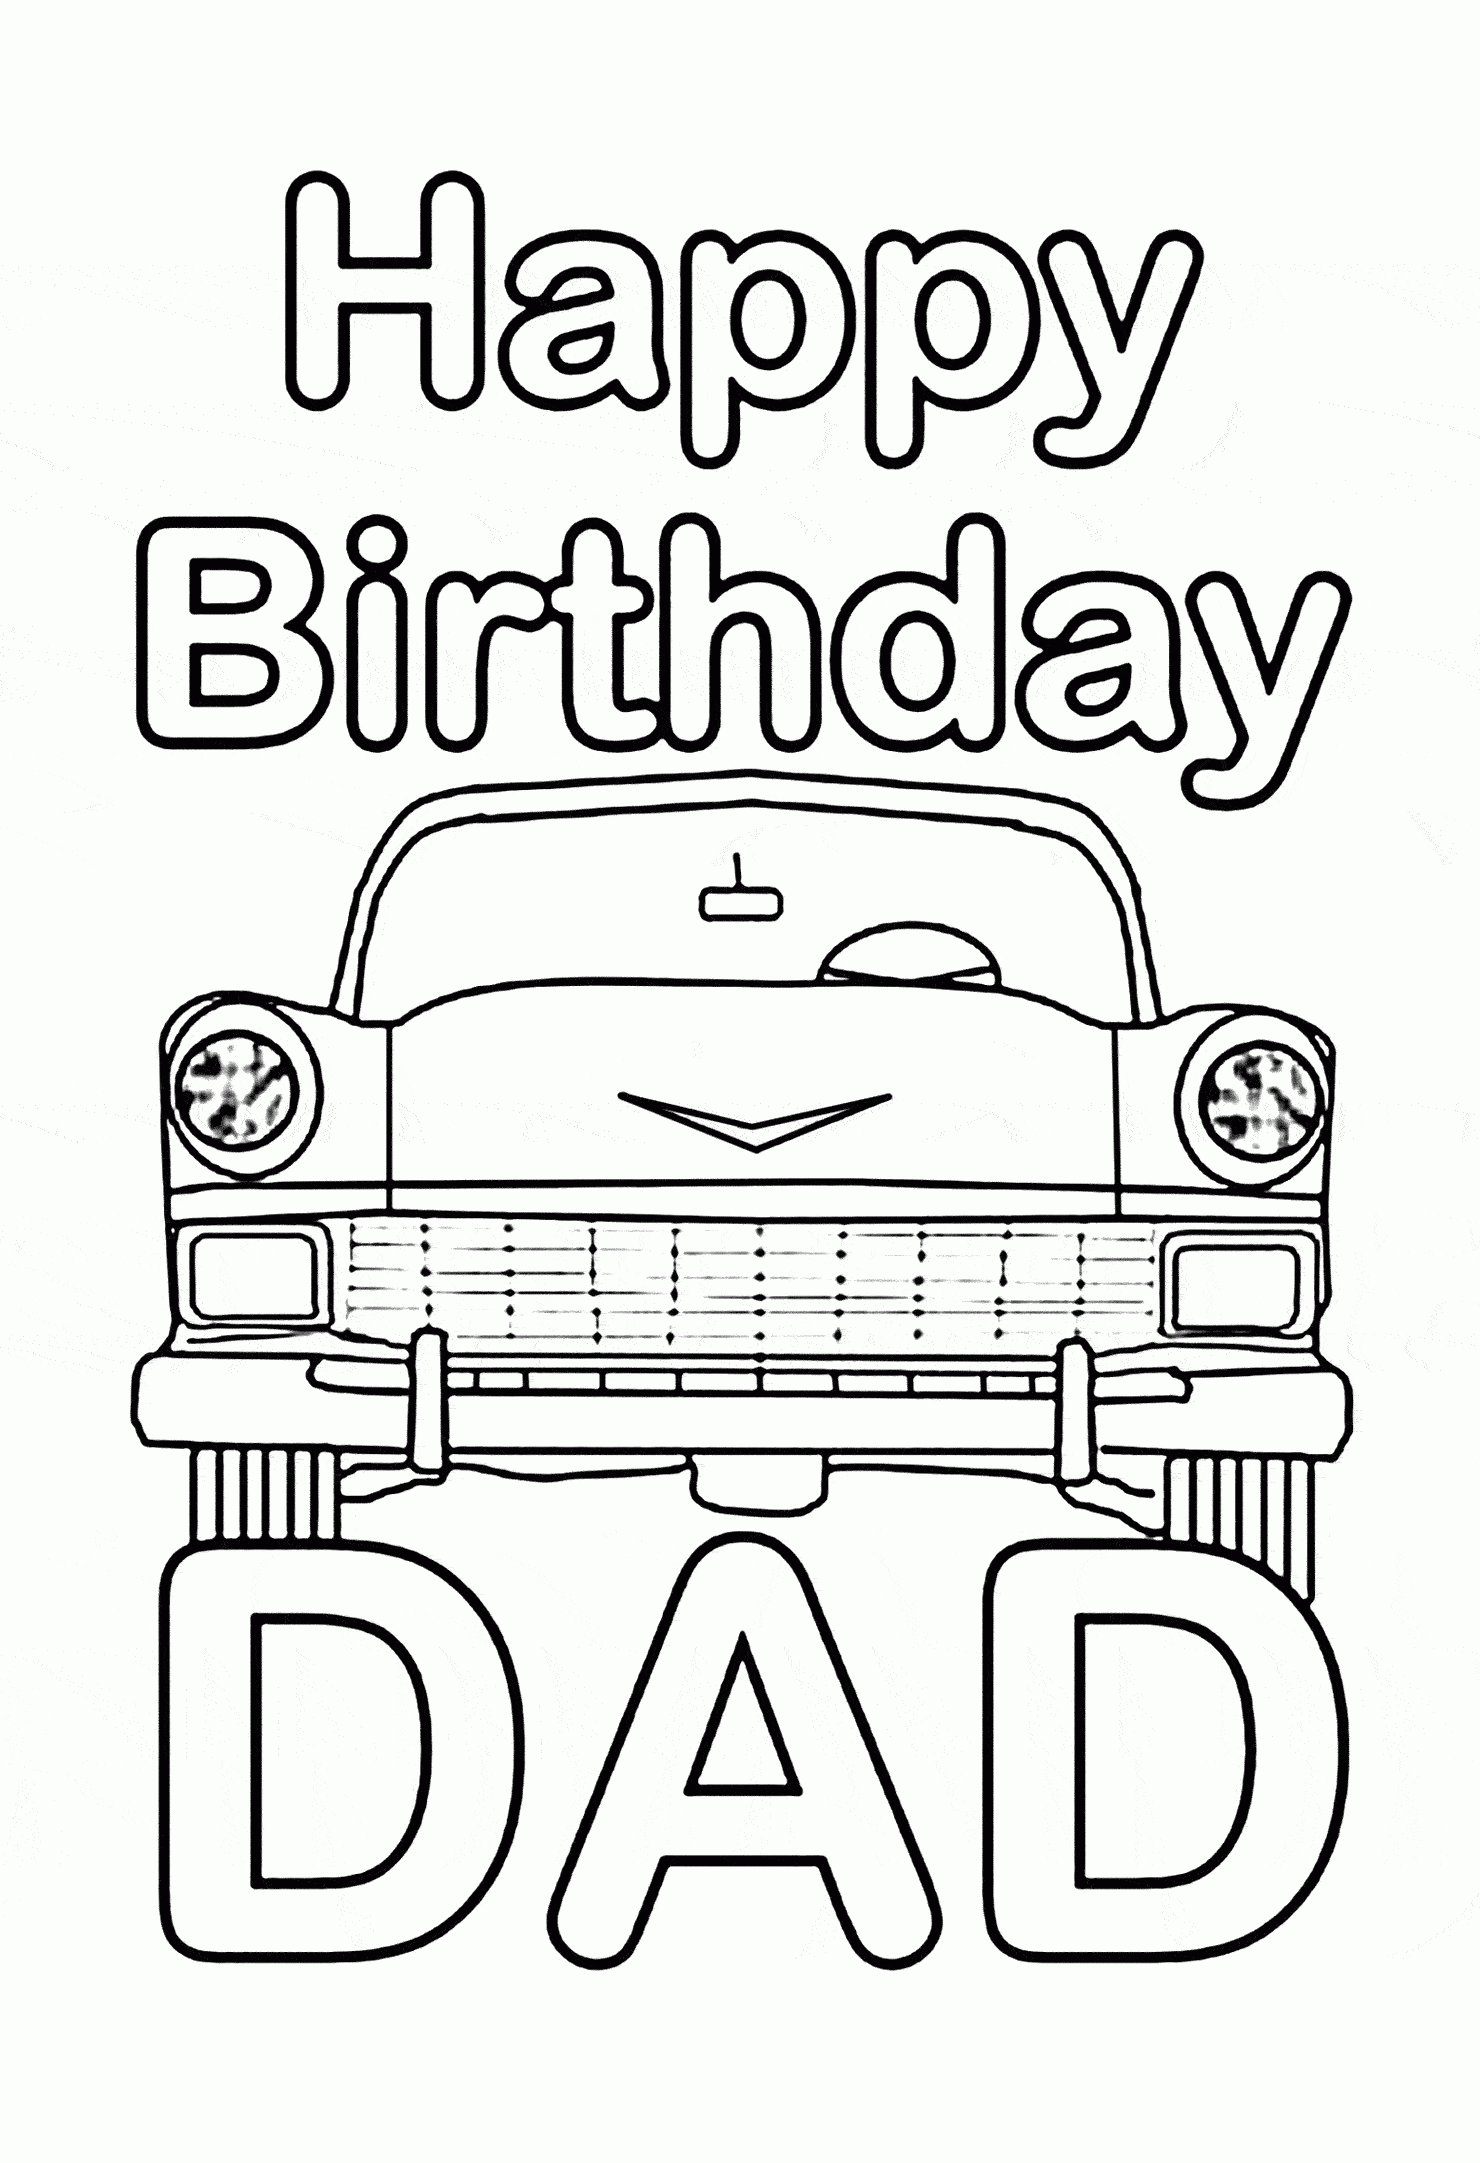 Happy Birthday Daddy Printable Coloring Page - Coloring Home